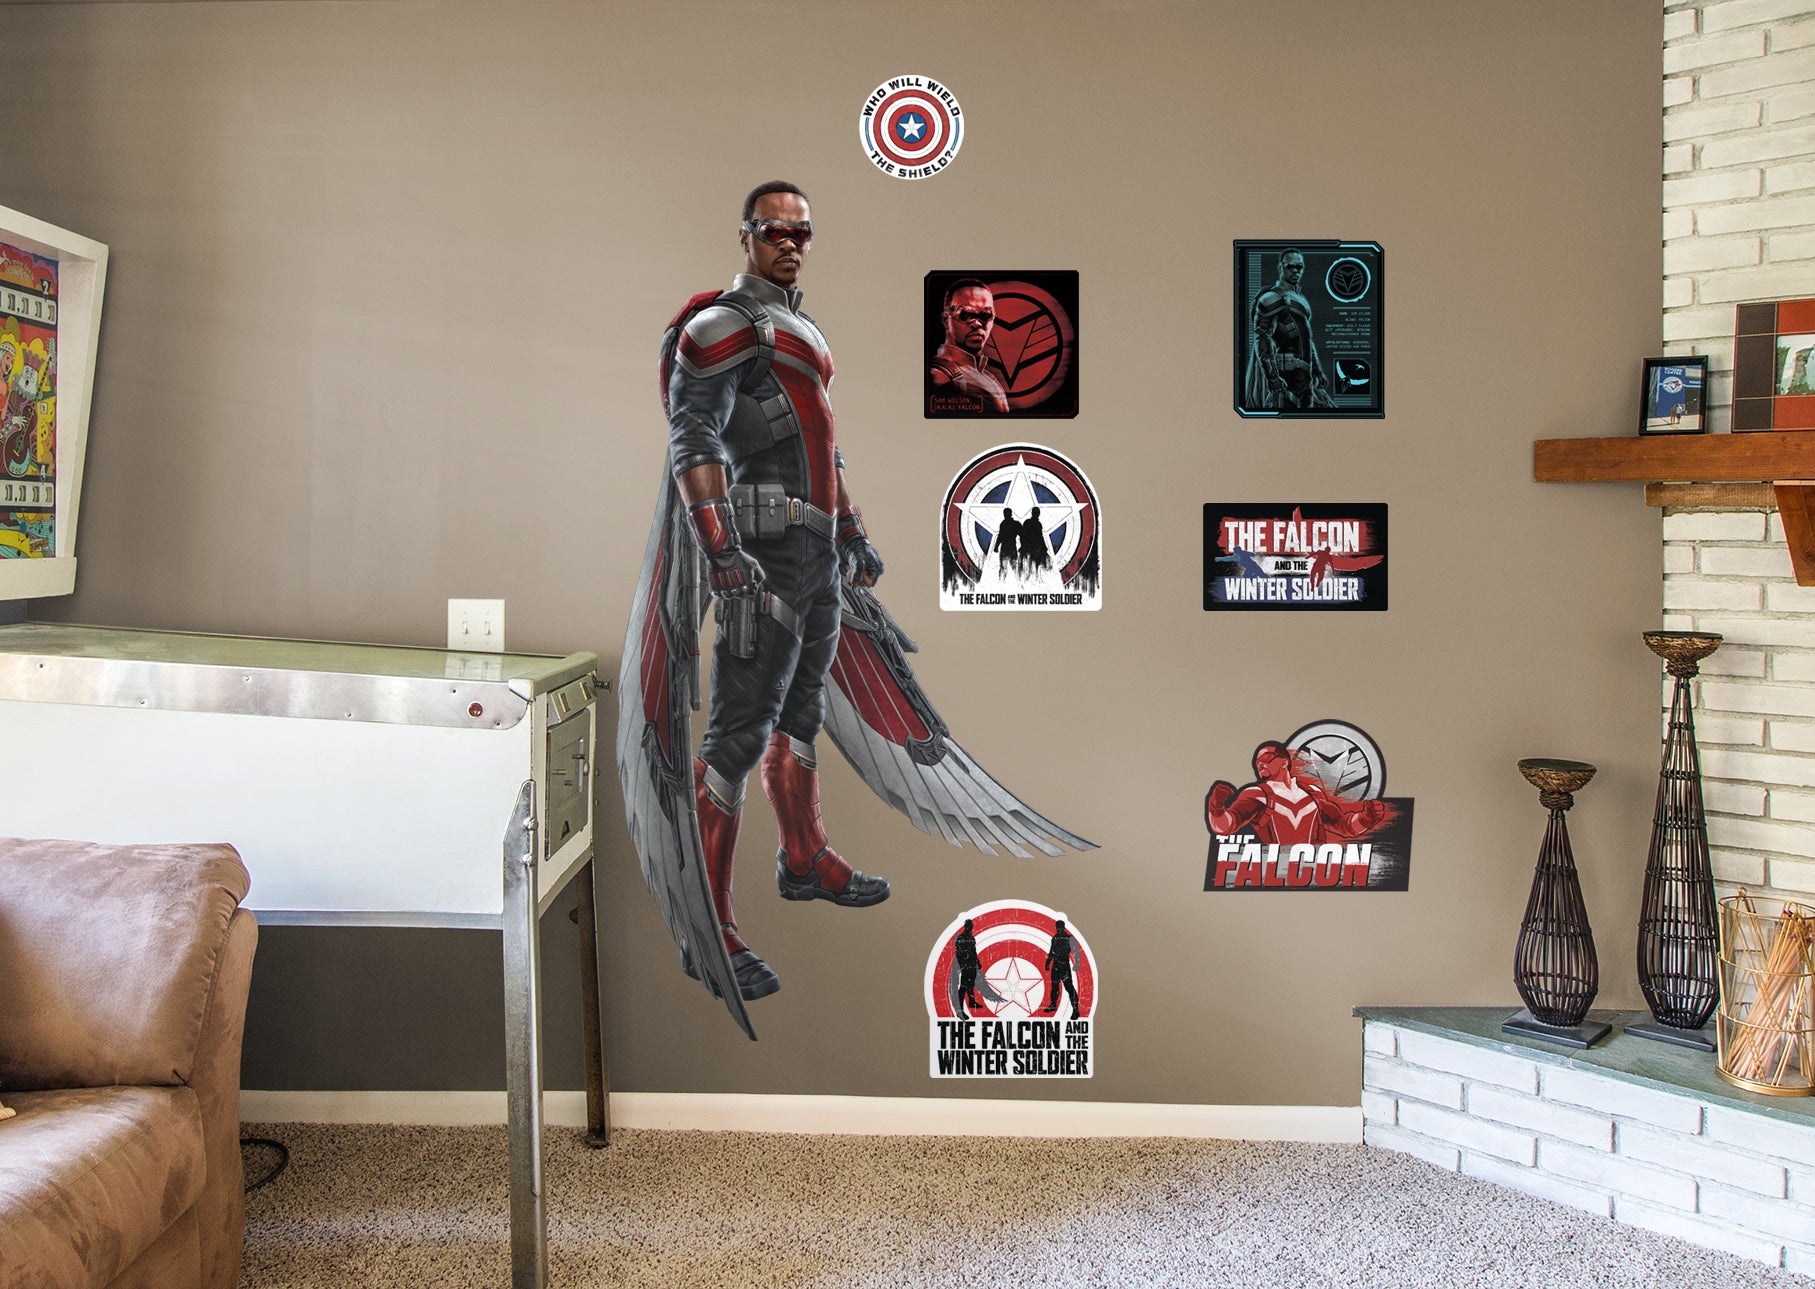 The Falcon & The Winter Soldier FALCON - Officially Licensed Marvel Removable Wall Decal Life-Size Character + 8 Decals by Fathe